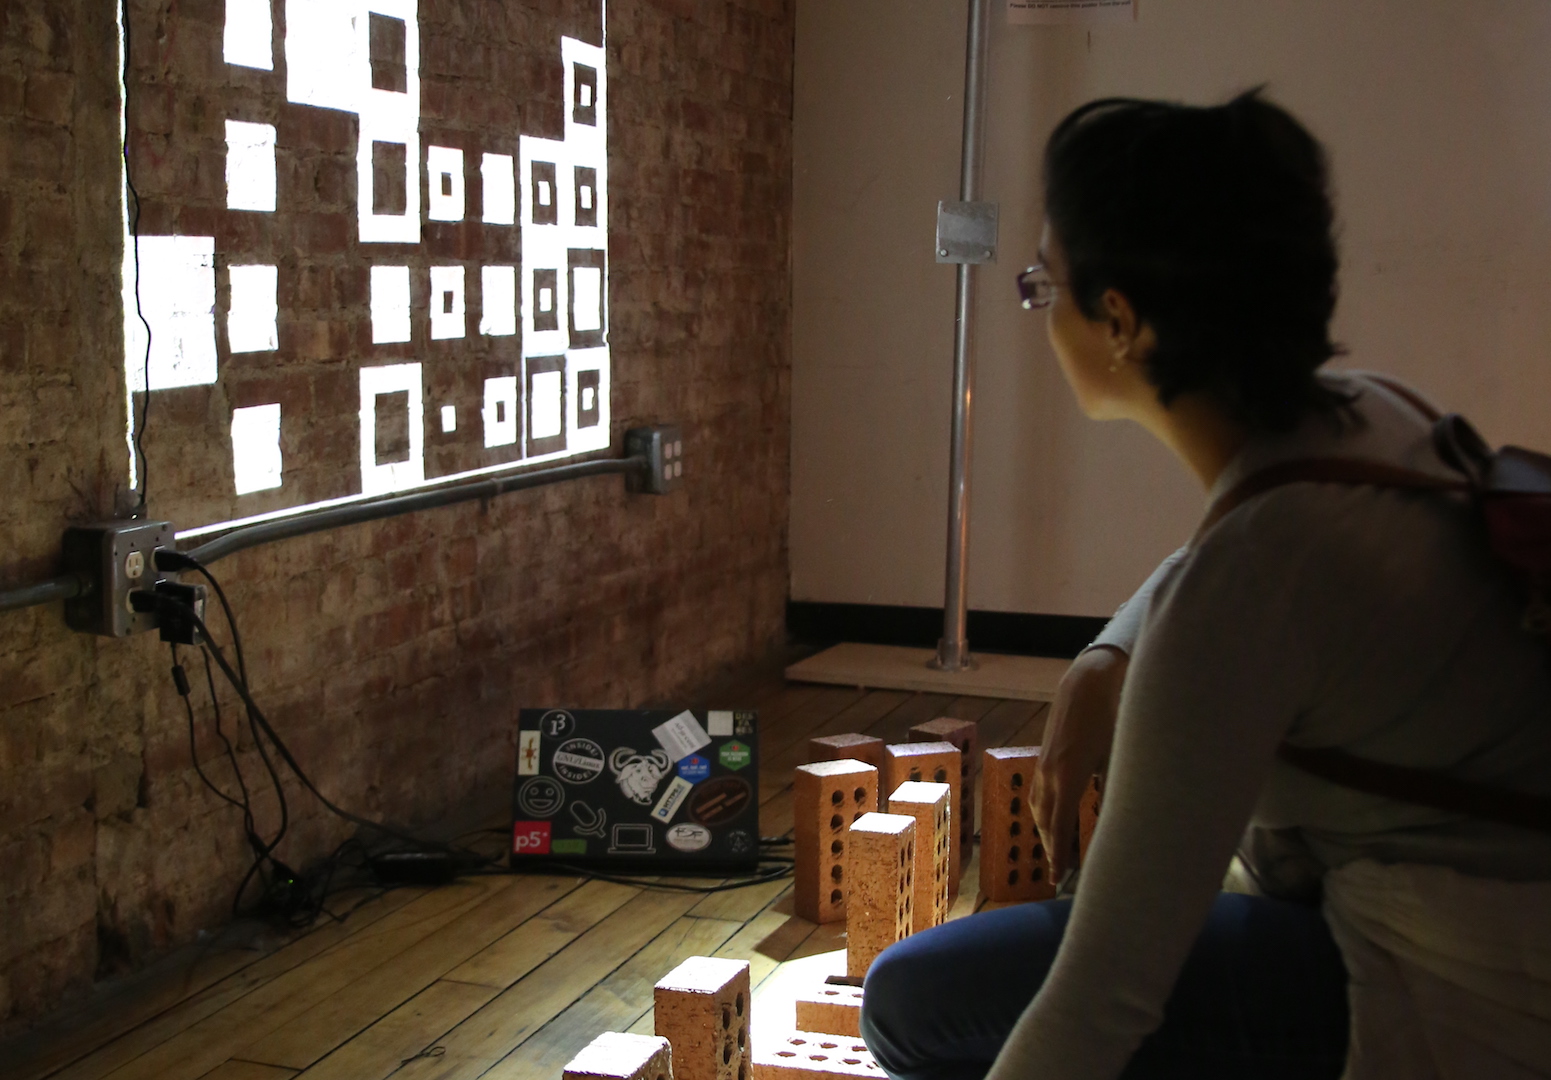 a person interacting with bricks while looking at black and white squares projected on the wall